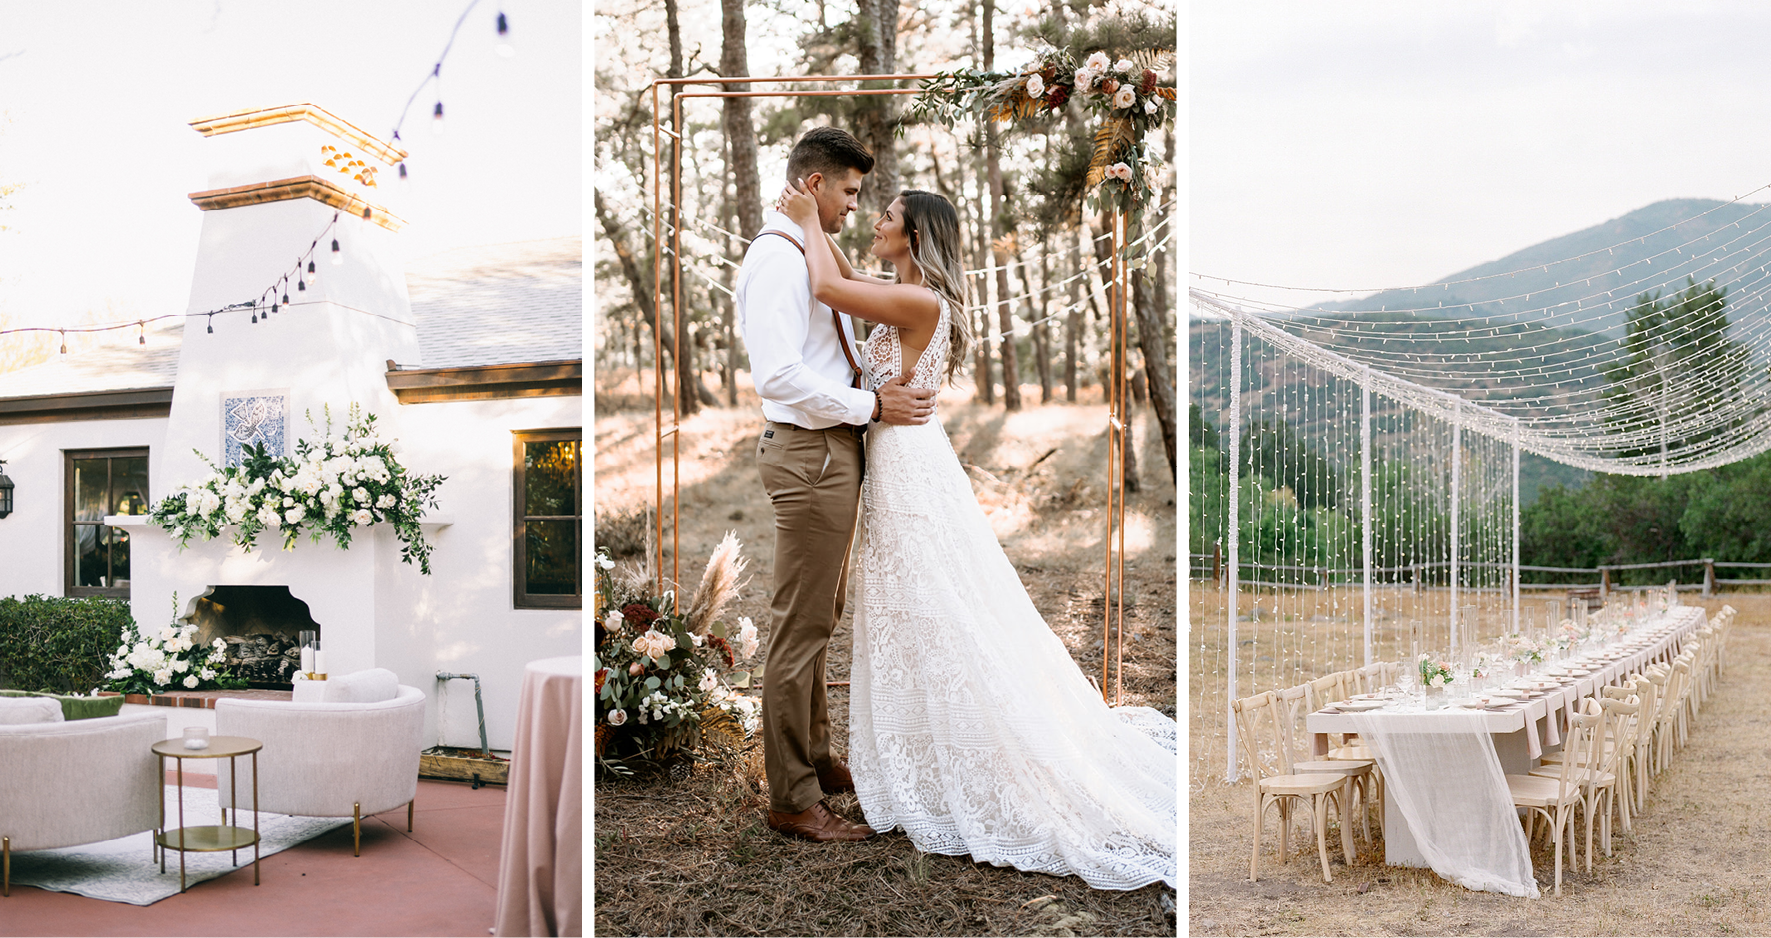 Collage of Outdoor Wedding Ideas for a Whimsical Celebration